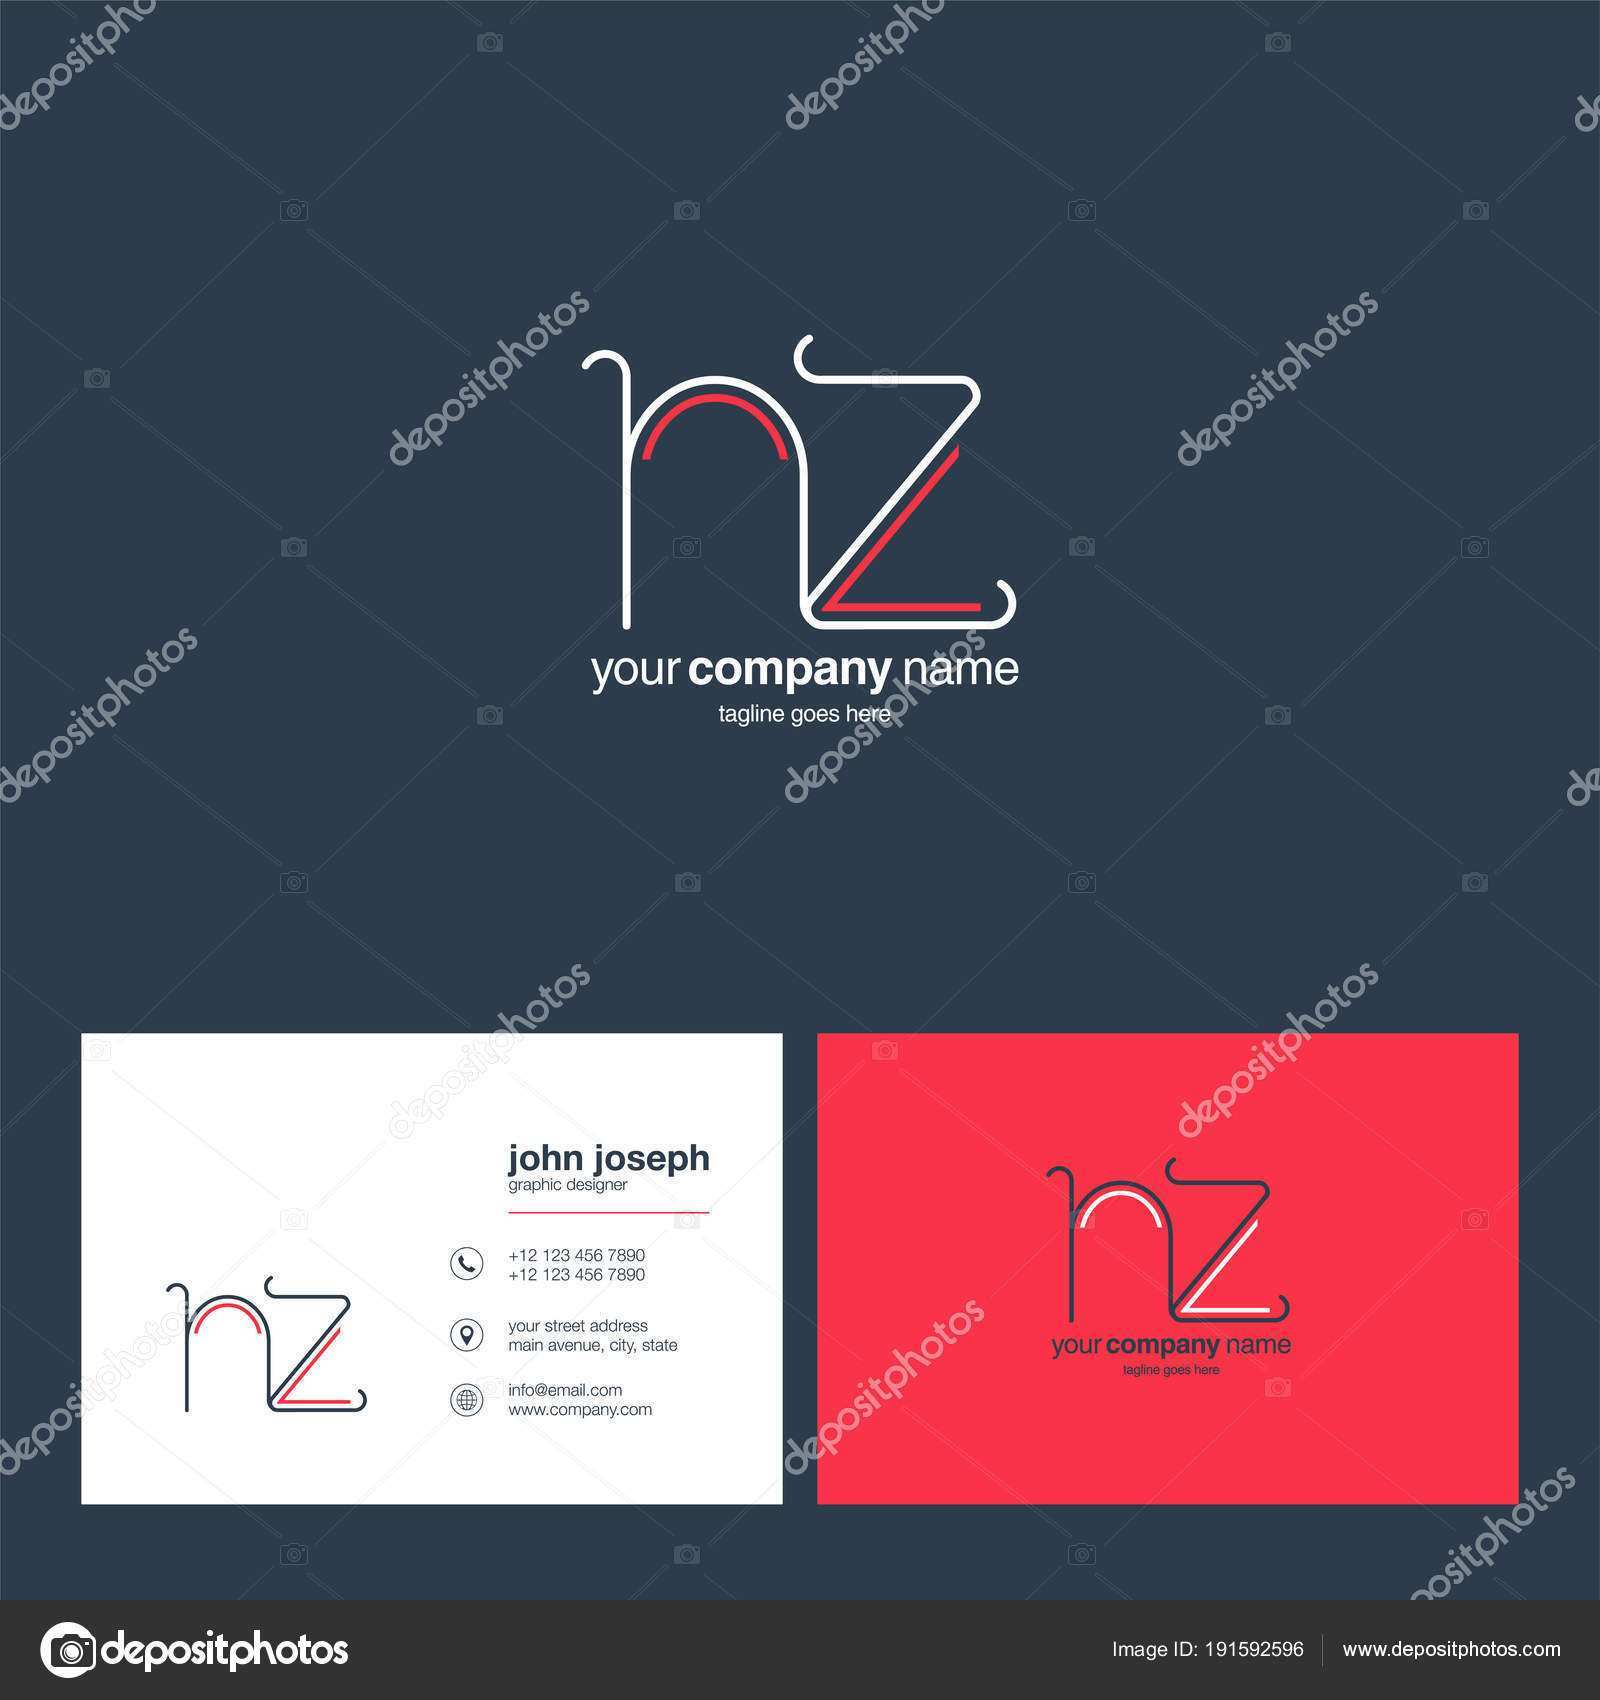 55 Blank Business Card Templates Nz Photo for Business Card Templates Nz